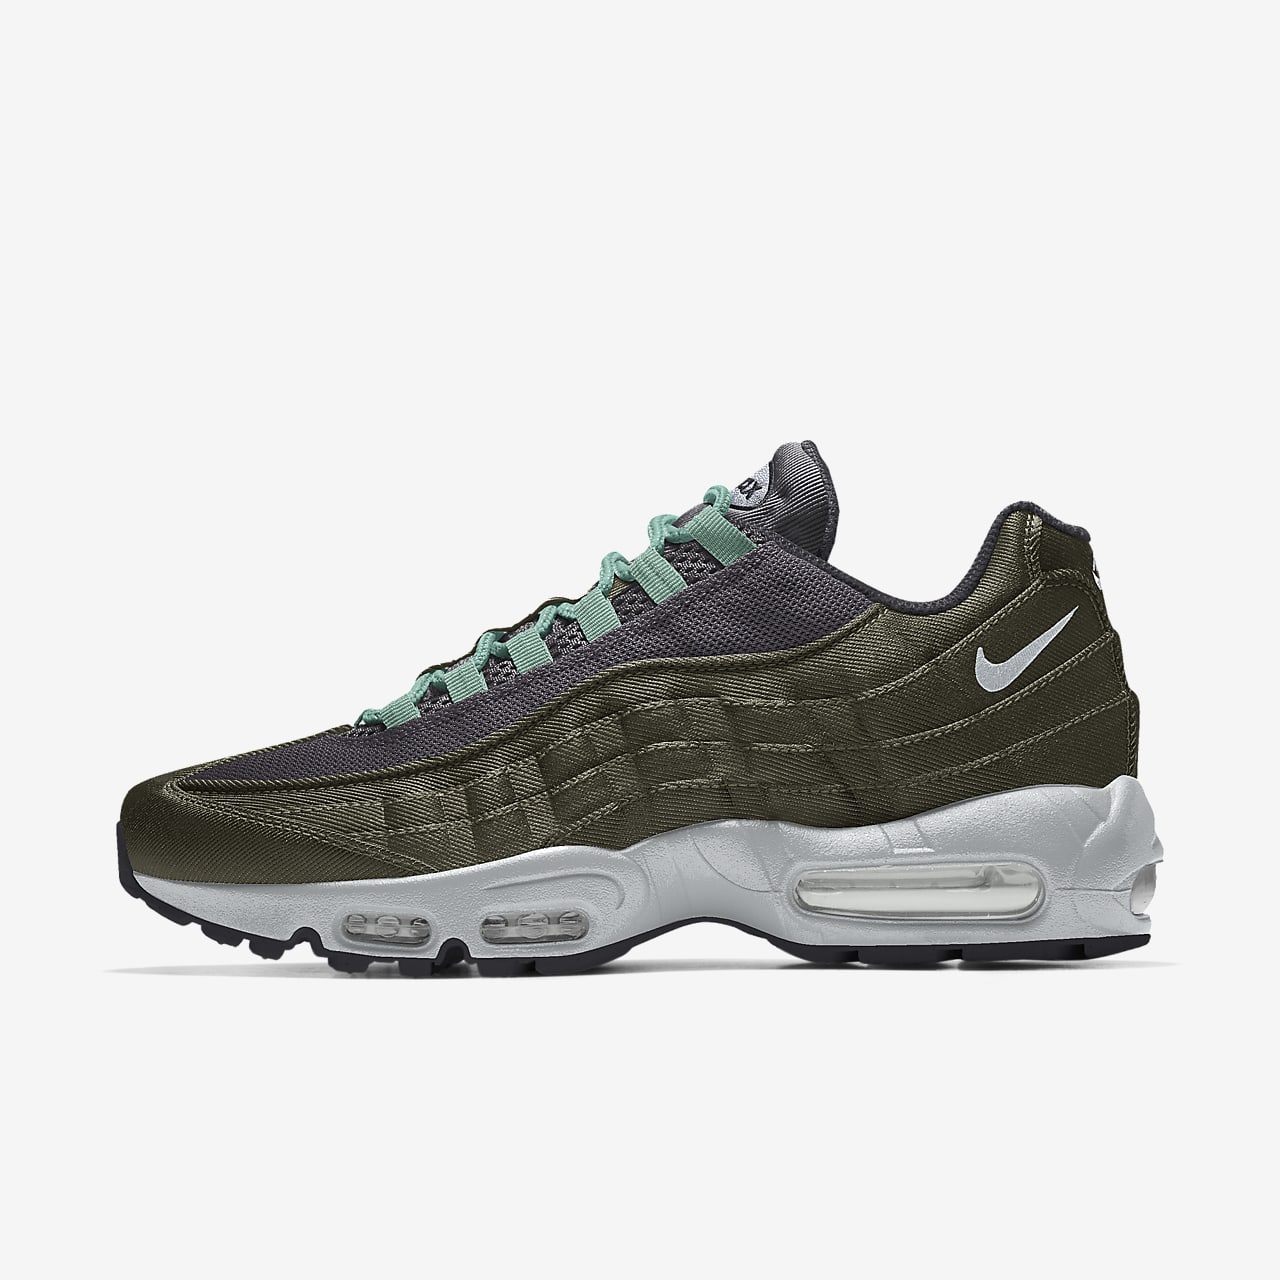 Air Max 95 By personalizables - Hombre. Nike